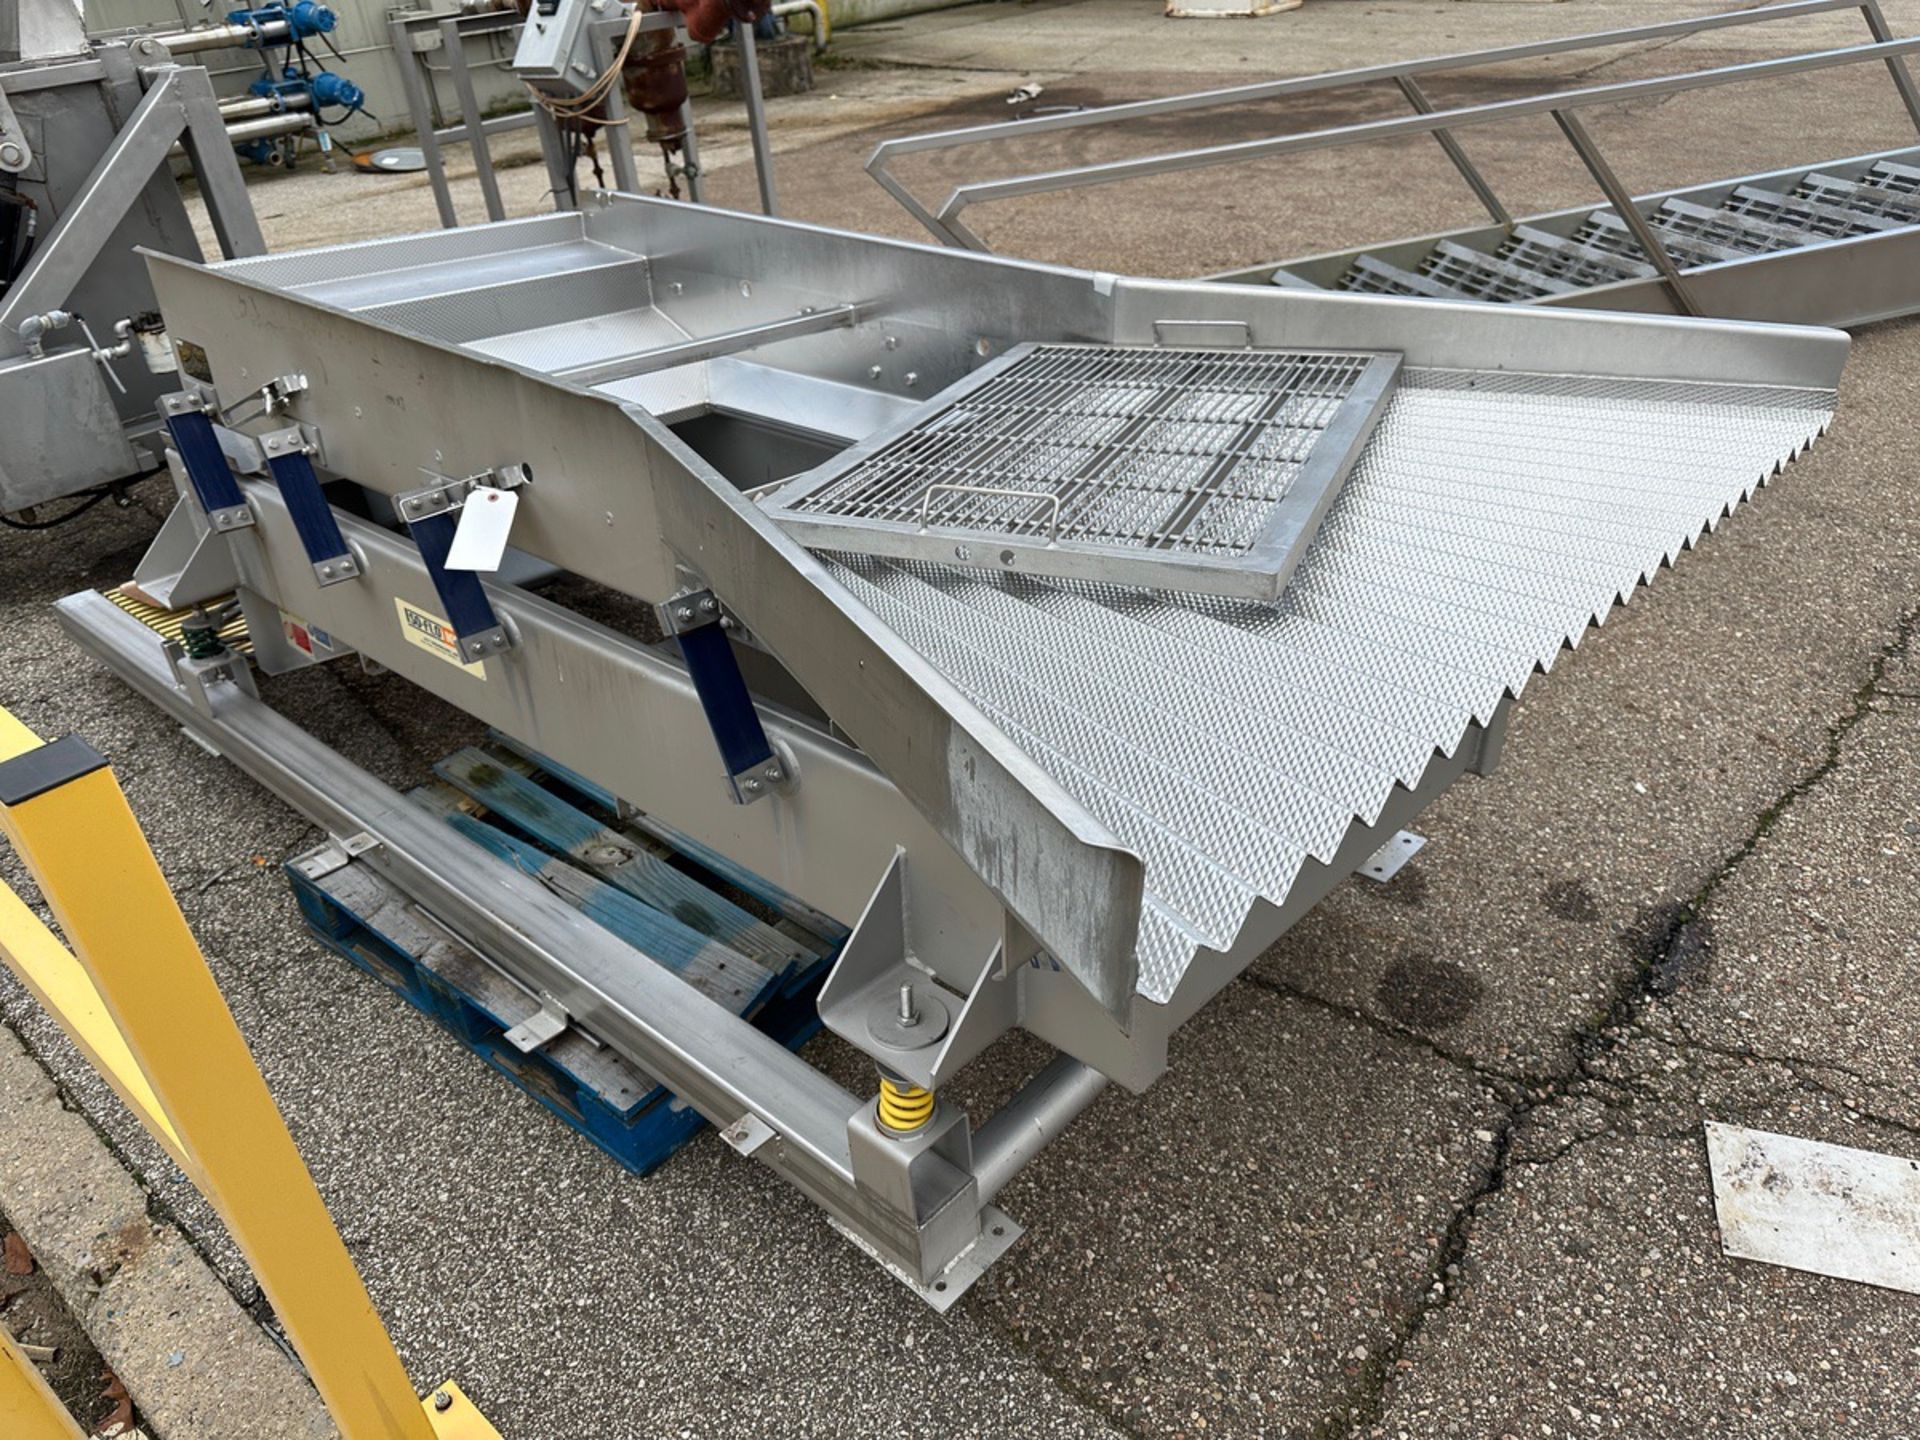 Key Iso-Flo Model 434795-1 Vibratory Conveyor with Fanned Exit (Approx. | Rig Fee $300